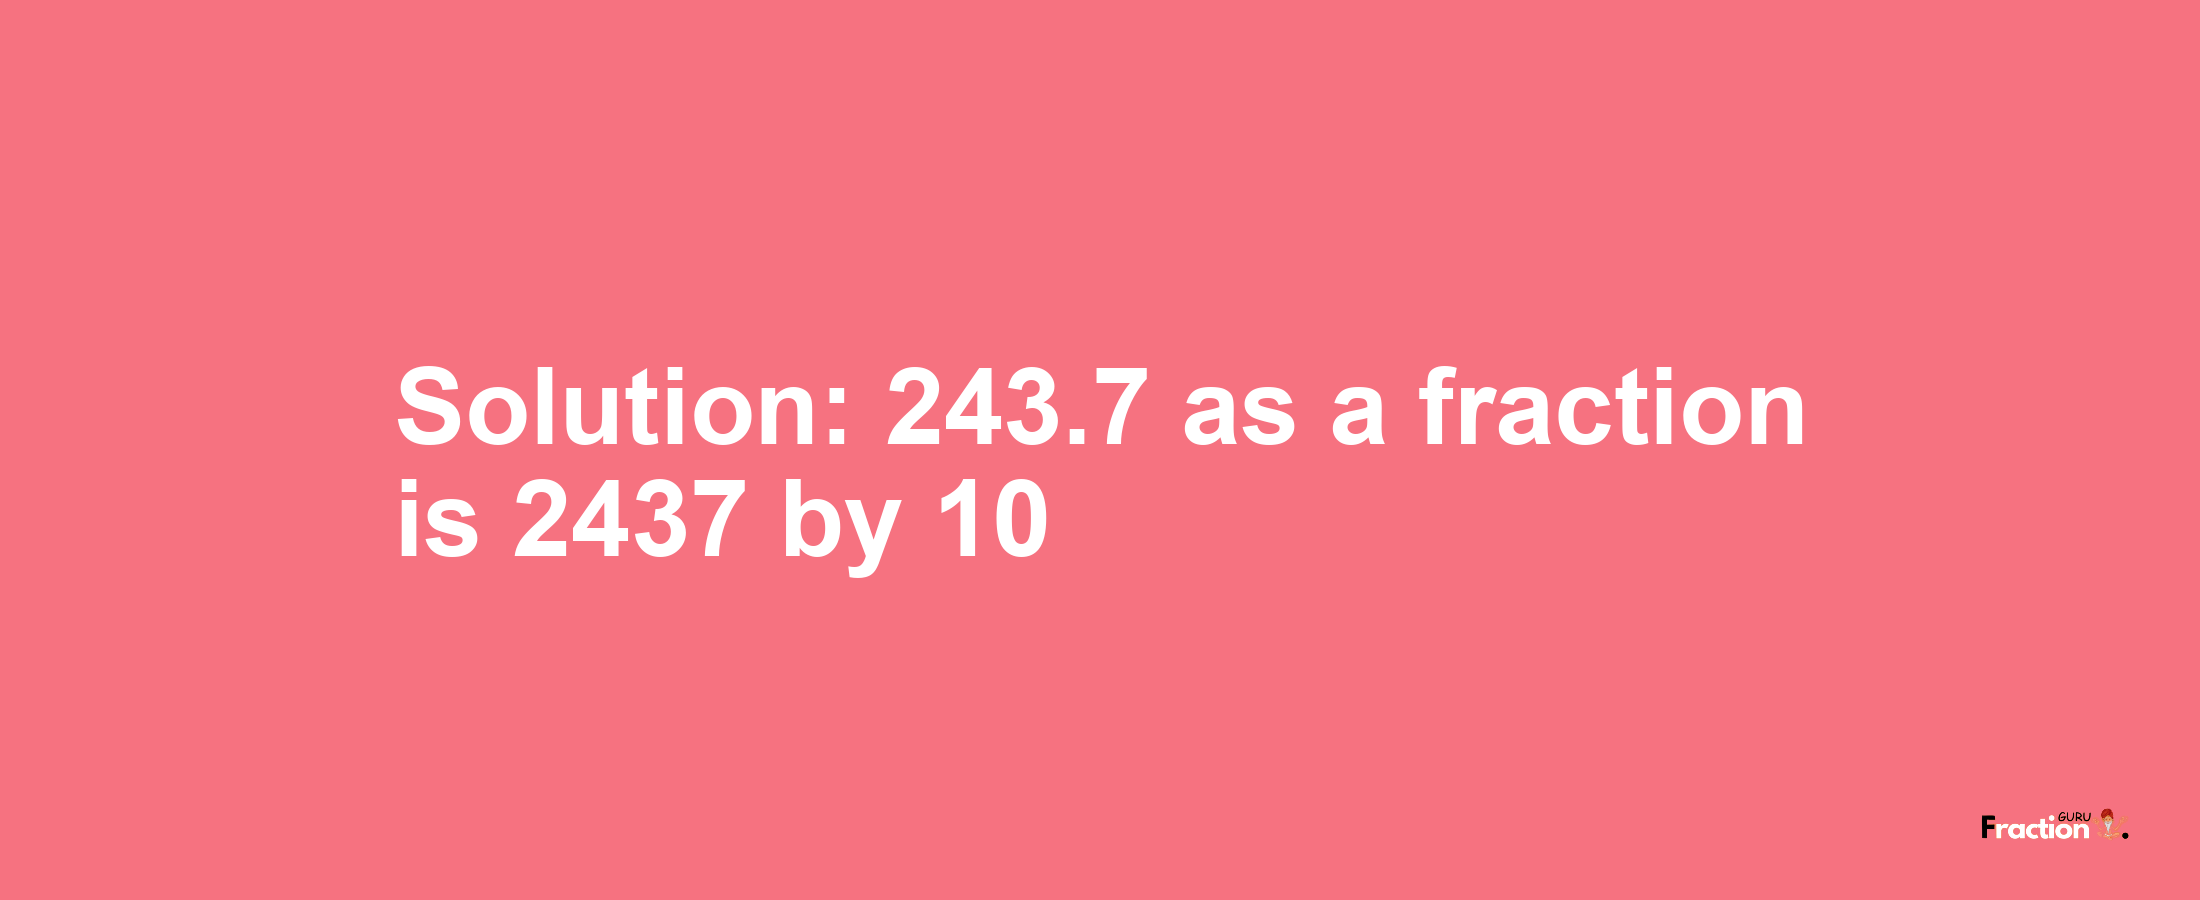 Solution:243.7 as a fraction is 2437/10